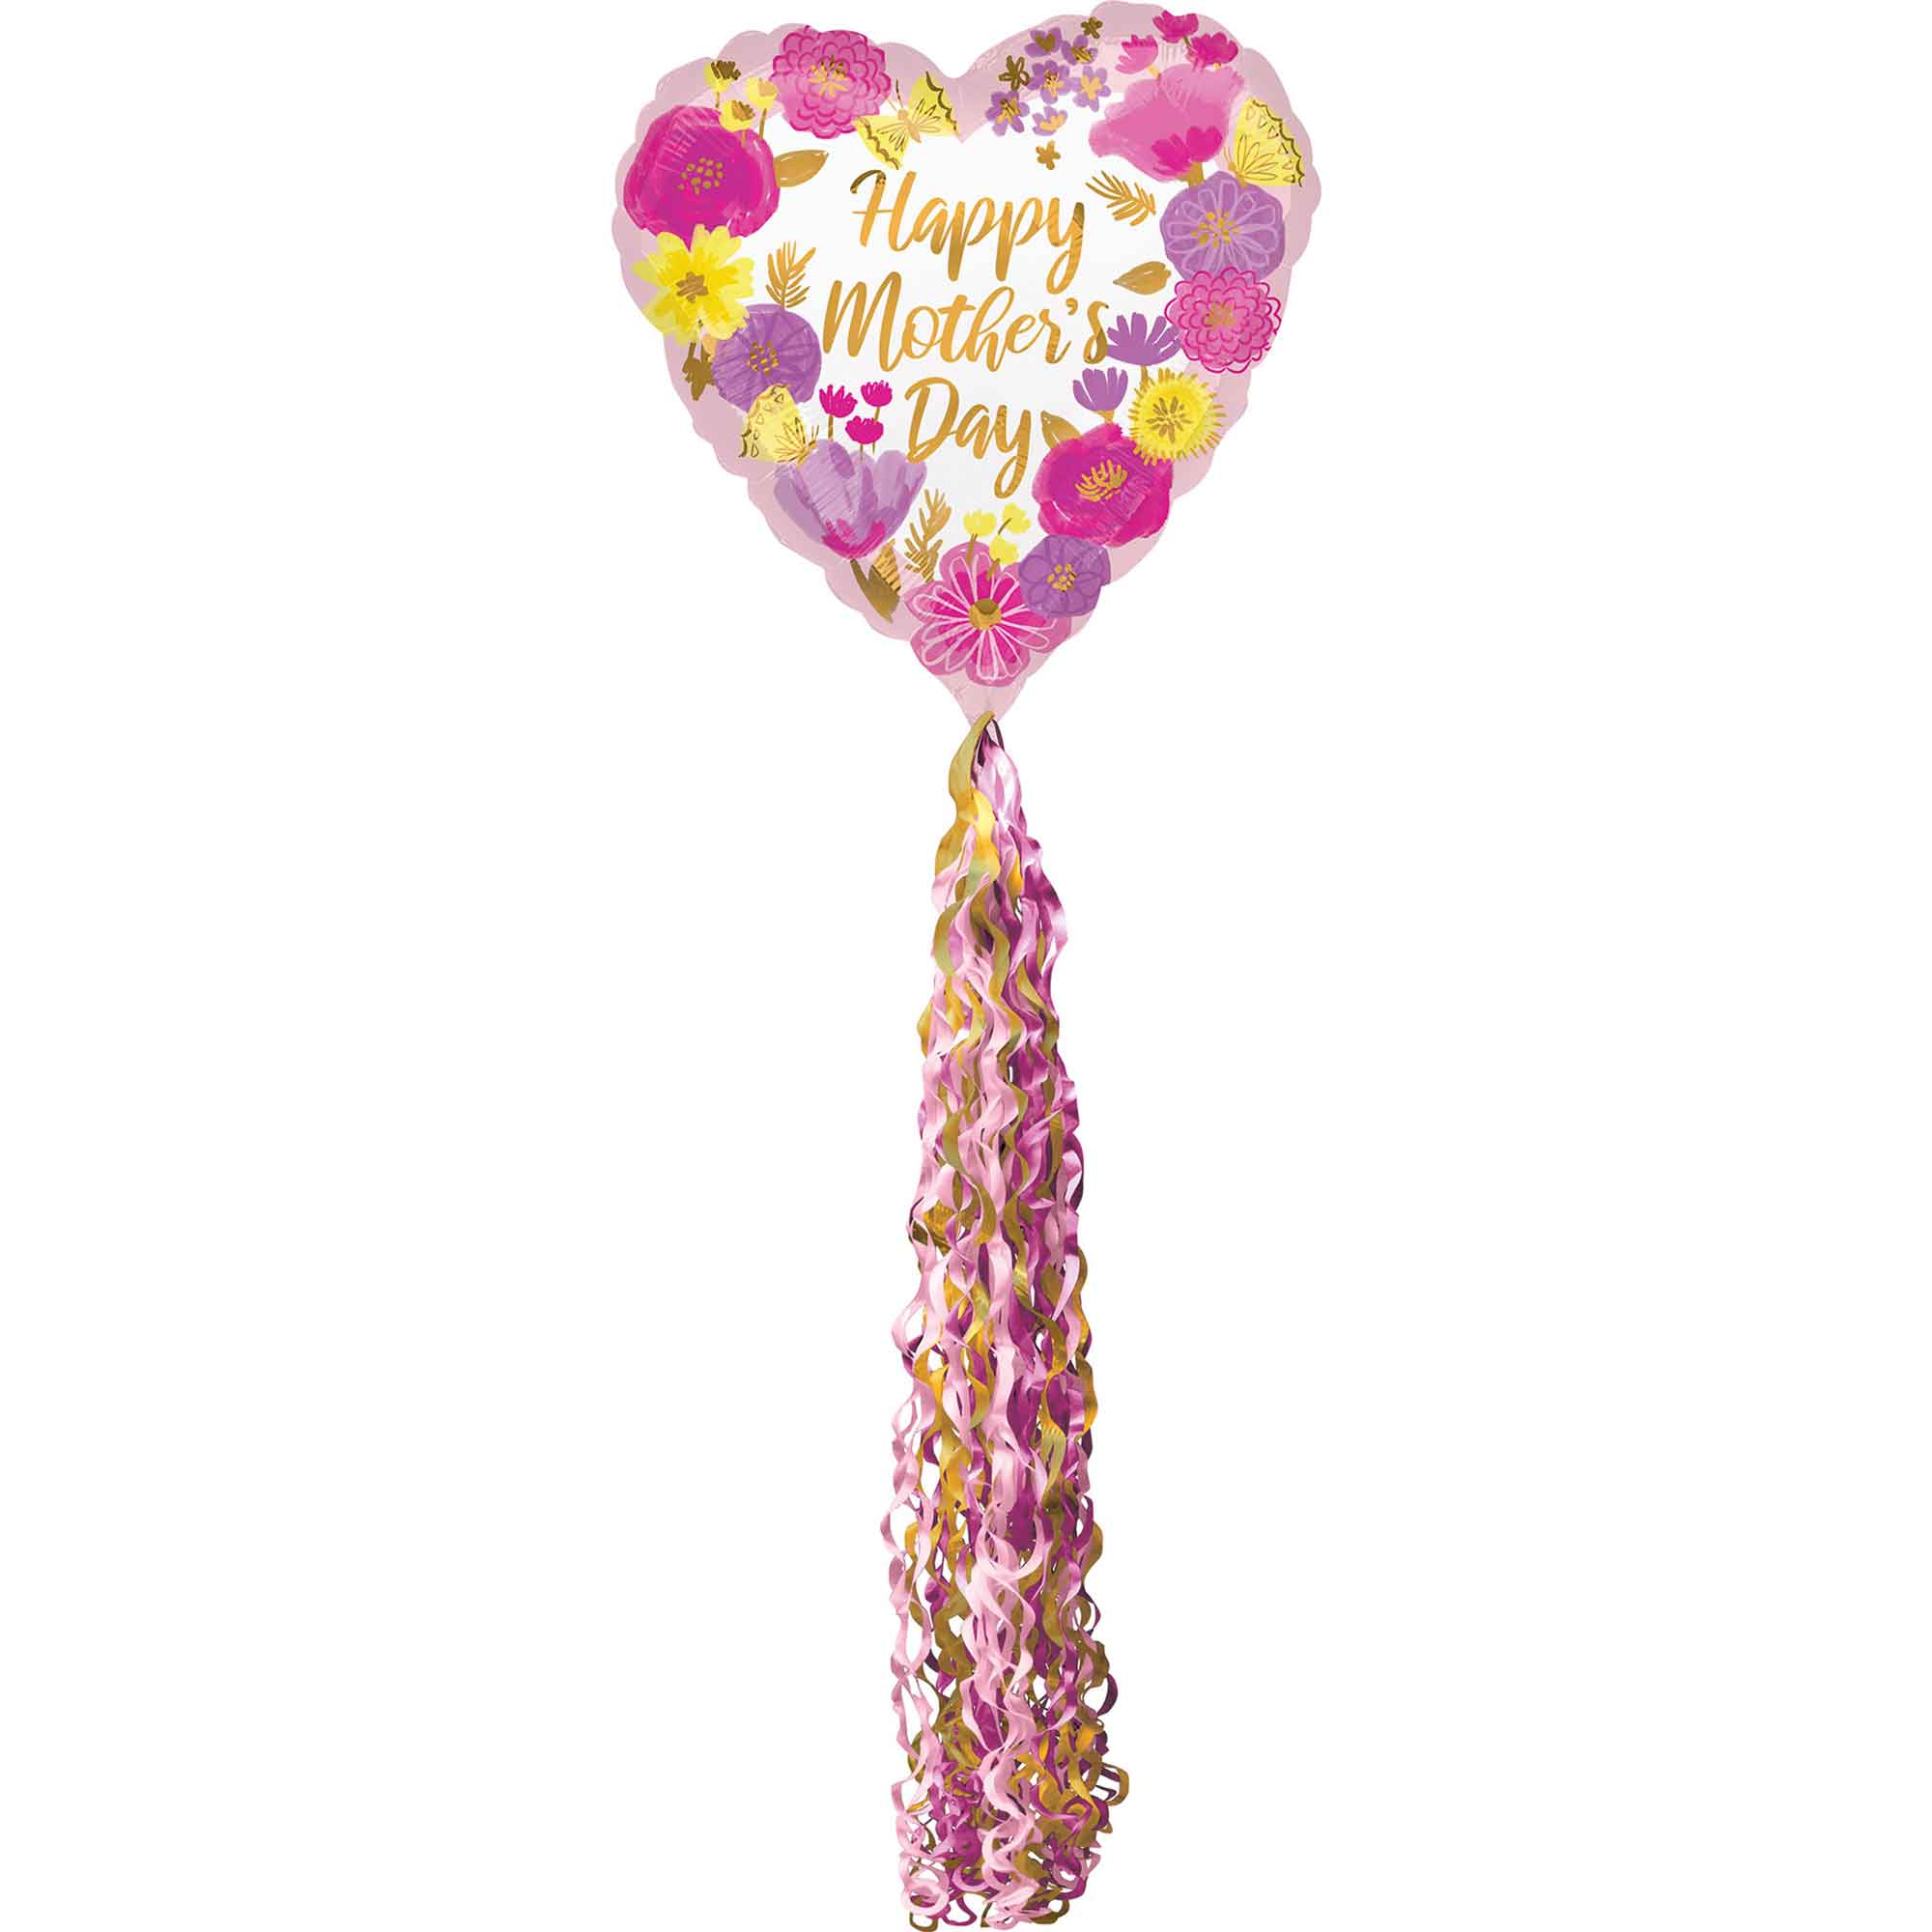 Mother's Day Floral Pom Pom Airwalker 81x213cm Balloons & Streamers - Party Centre